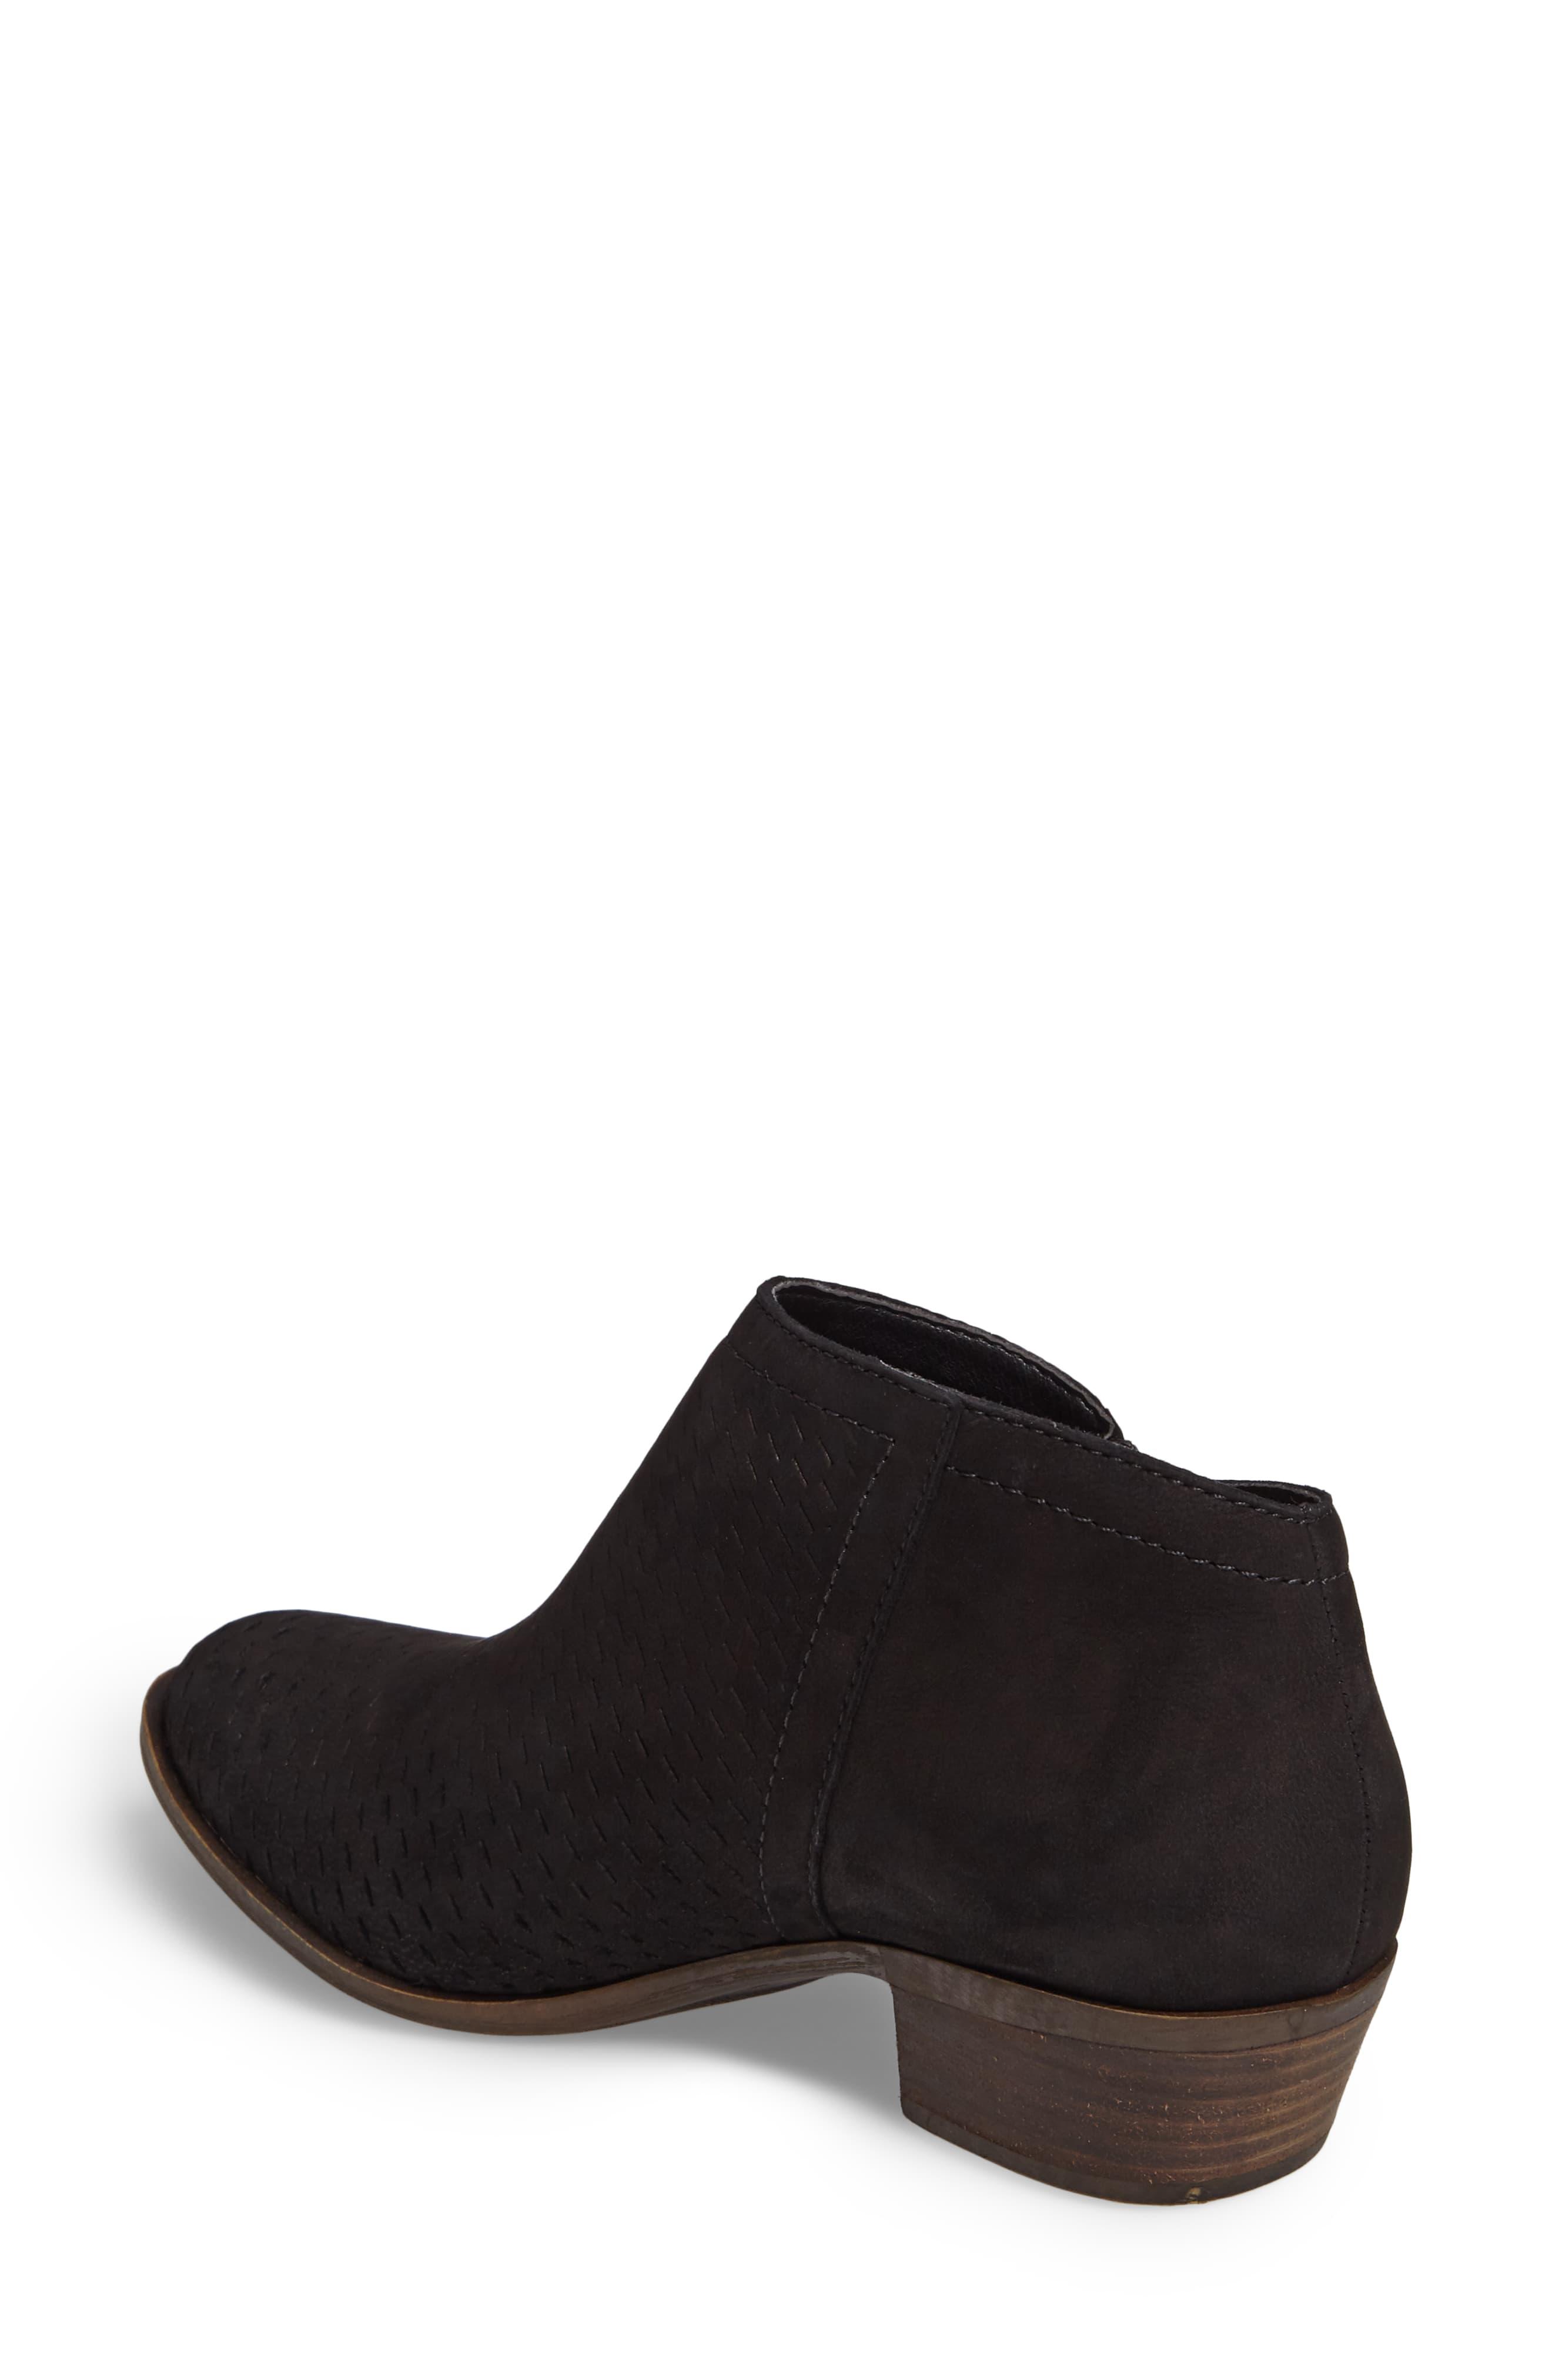 lucky brand booties black suede